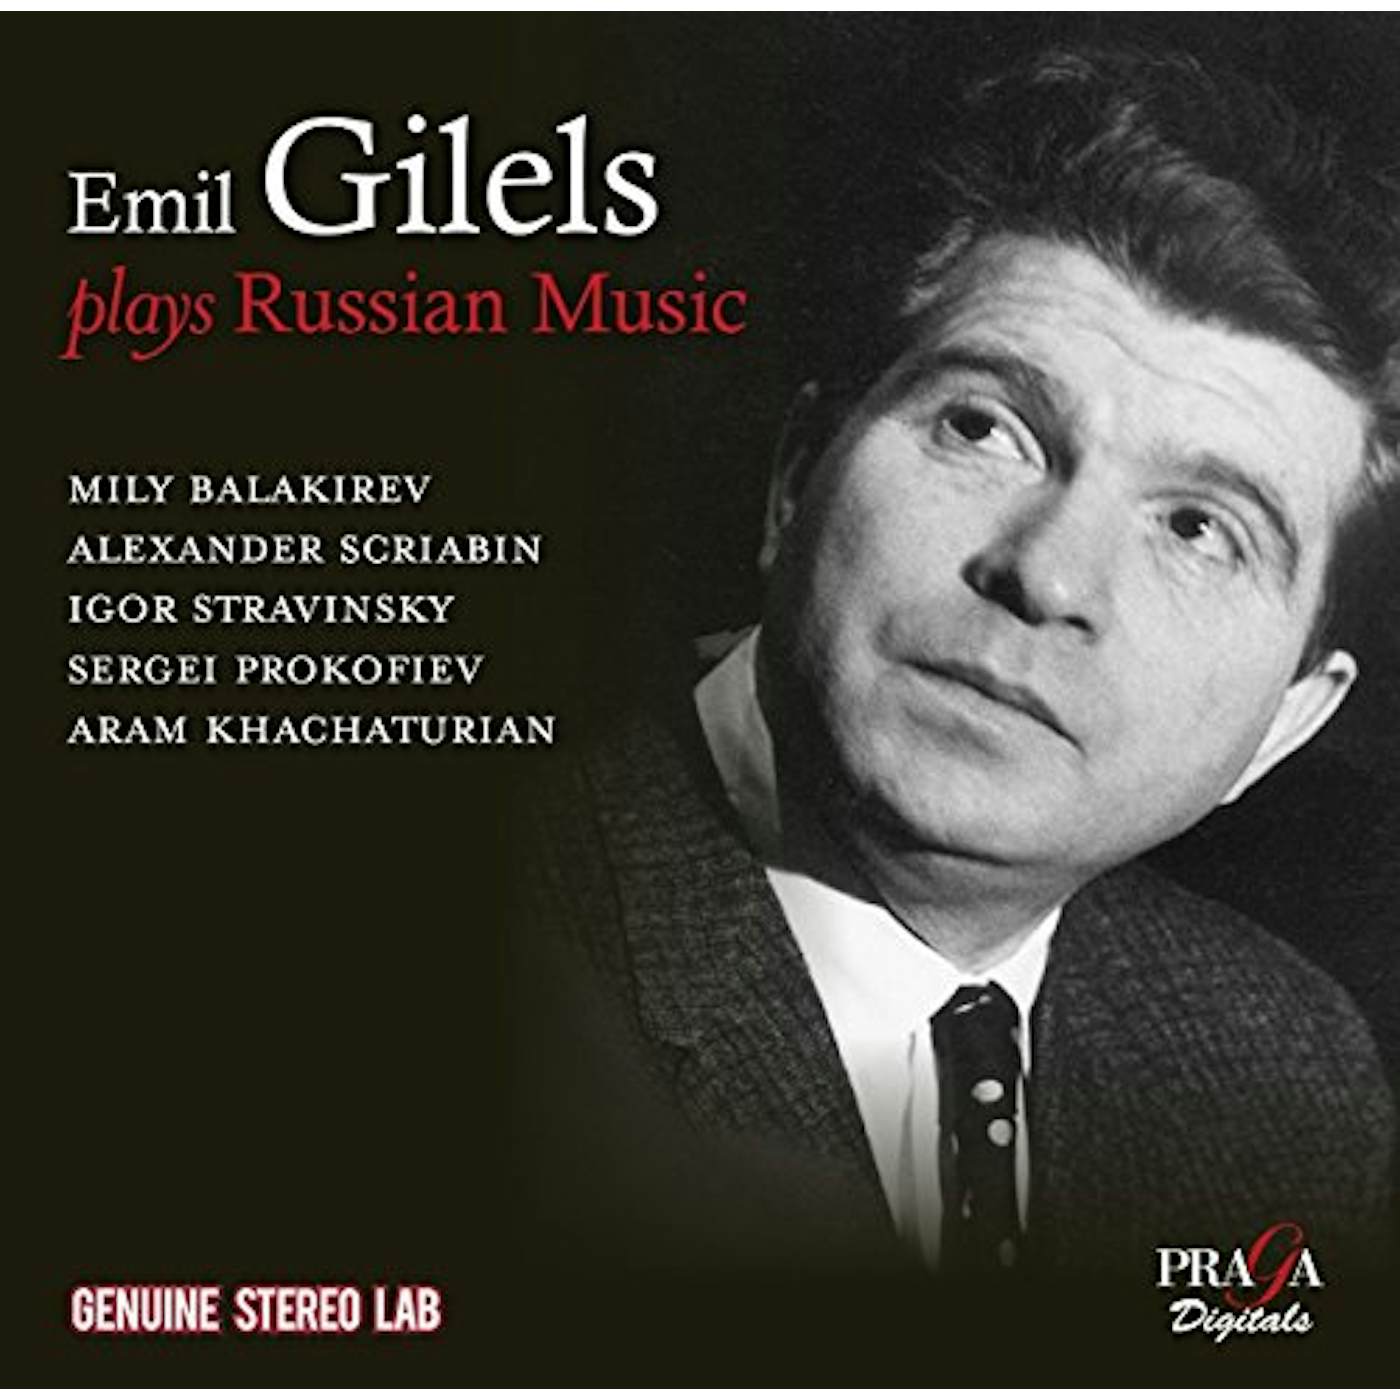 EMIL GILELS PLAYS RUSSIAN MUSIC CD